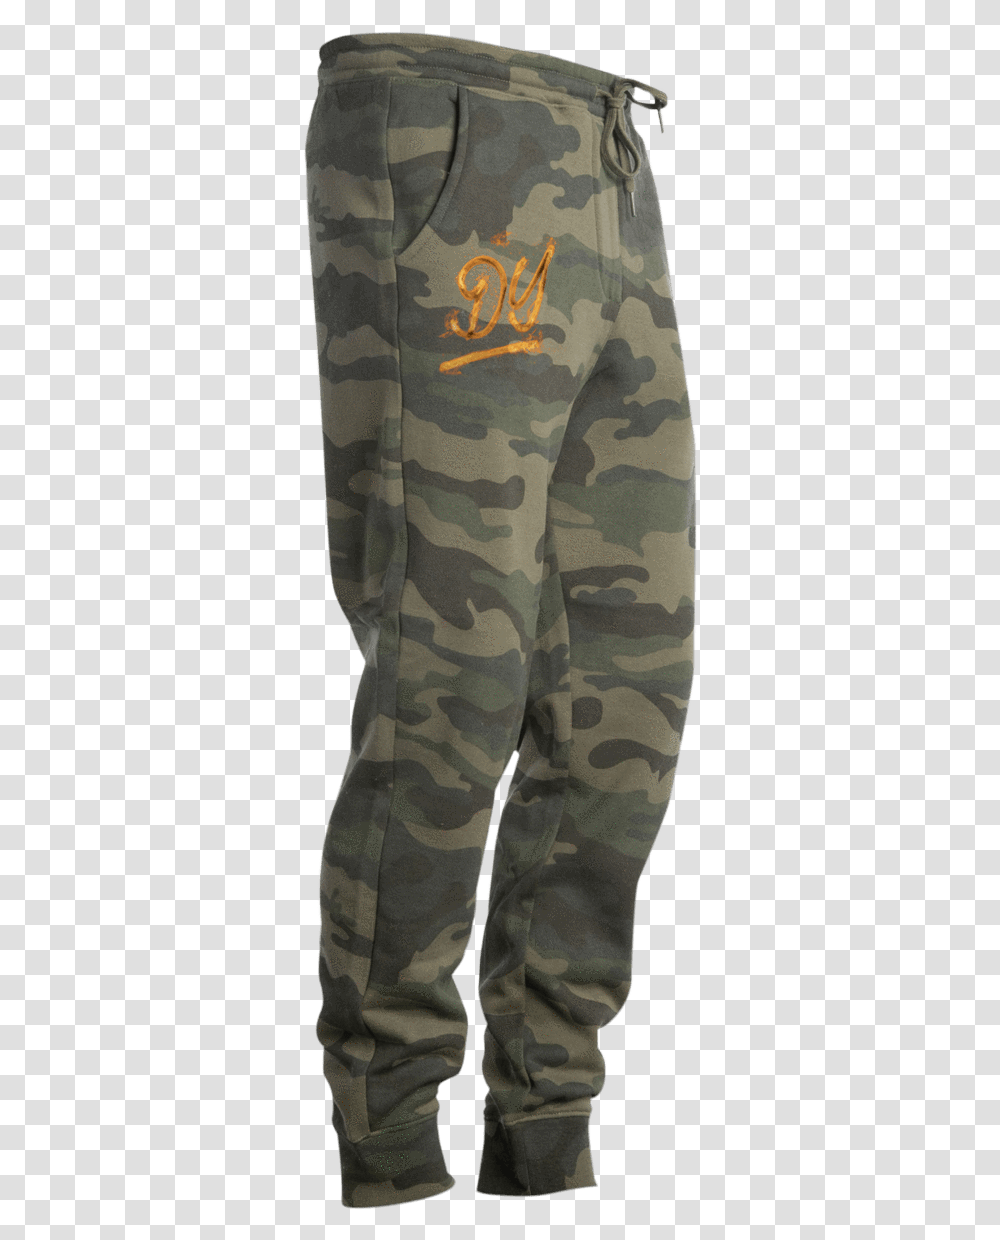 Barrio Fino Jogger Pants Gasolina CamoClass, Military, Military Uniform, Camouflage, Sleeve Transparent Png